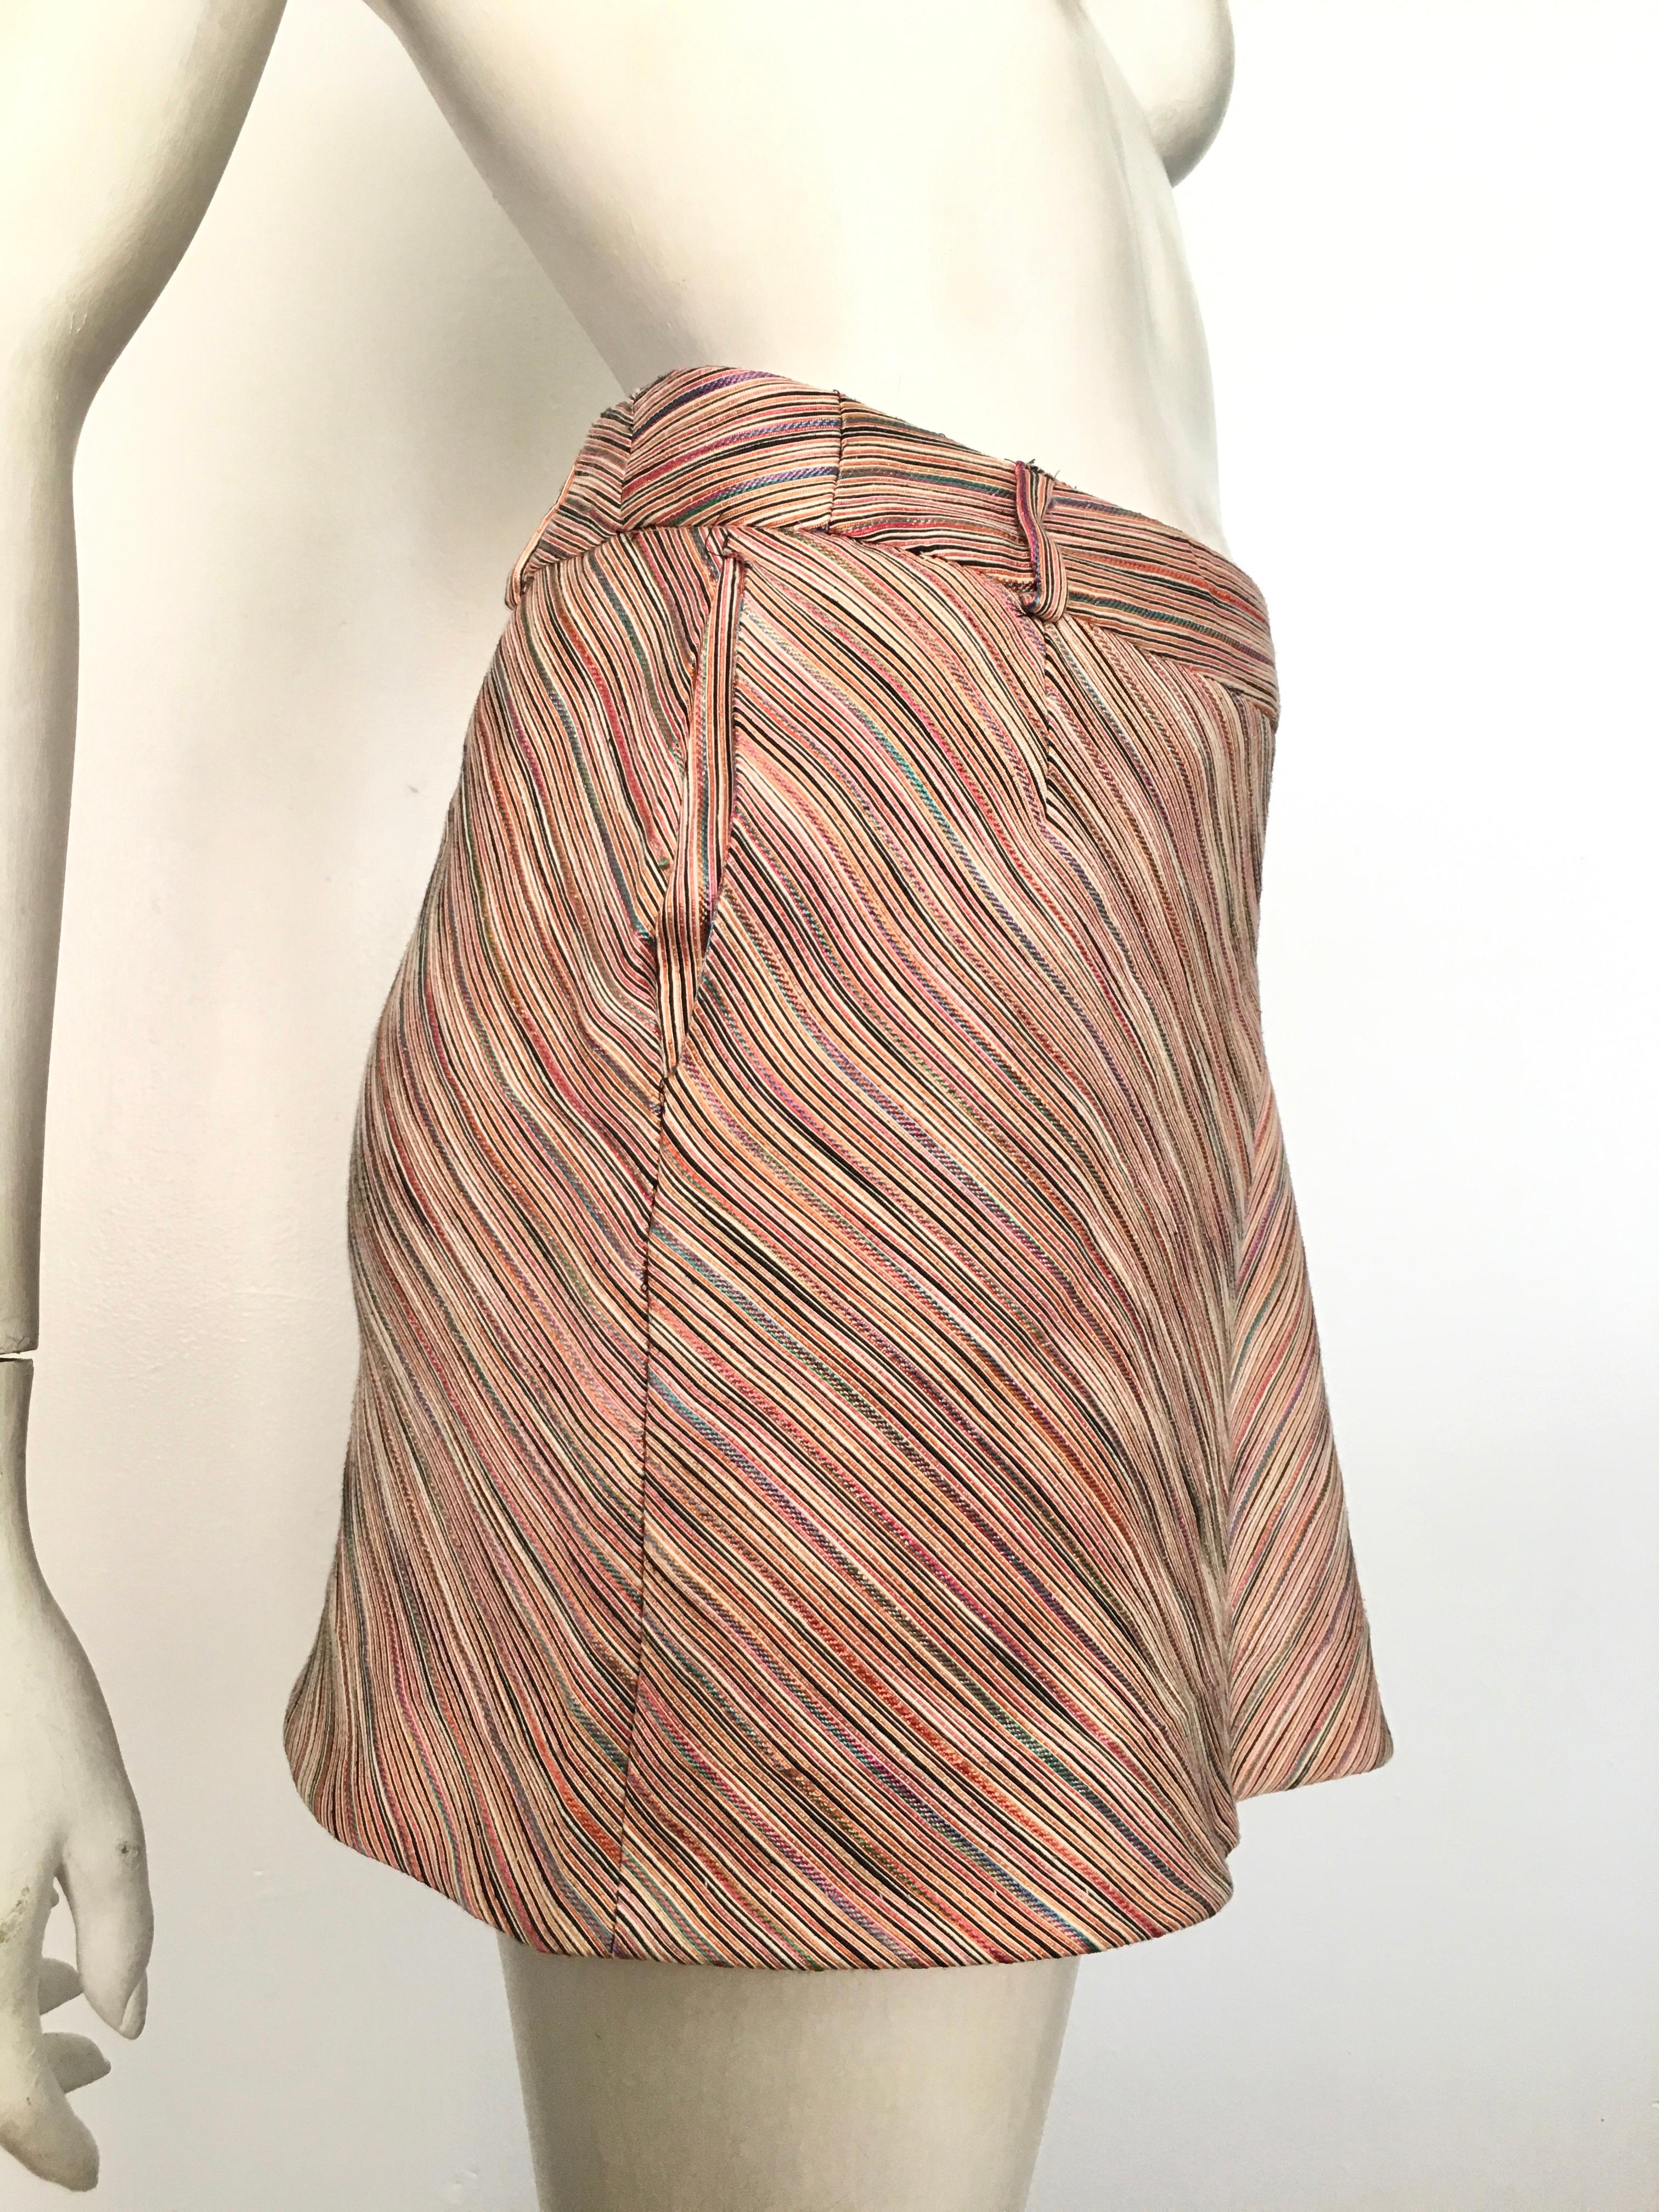 Missoni M mini skirt with pockets is a size 6.  The waist is 30